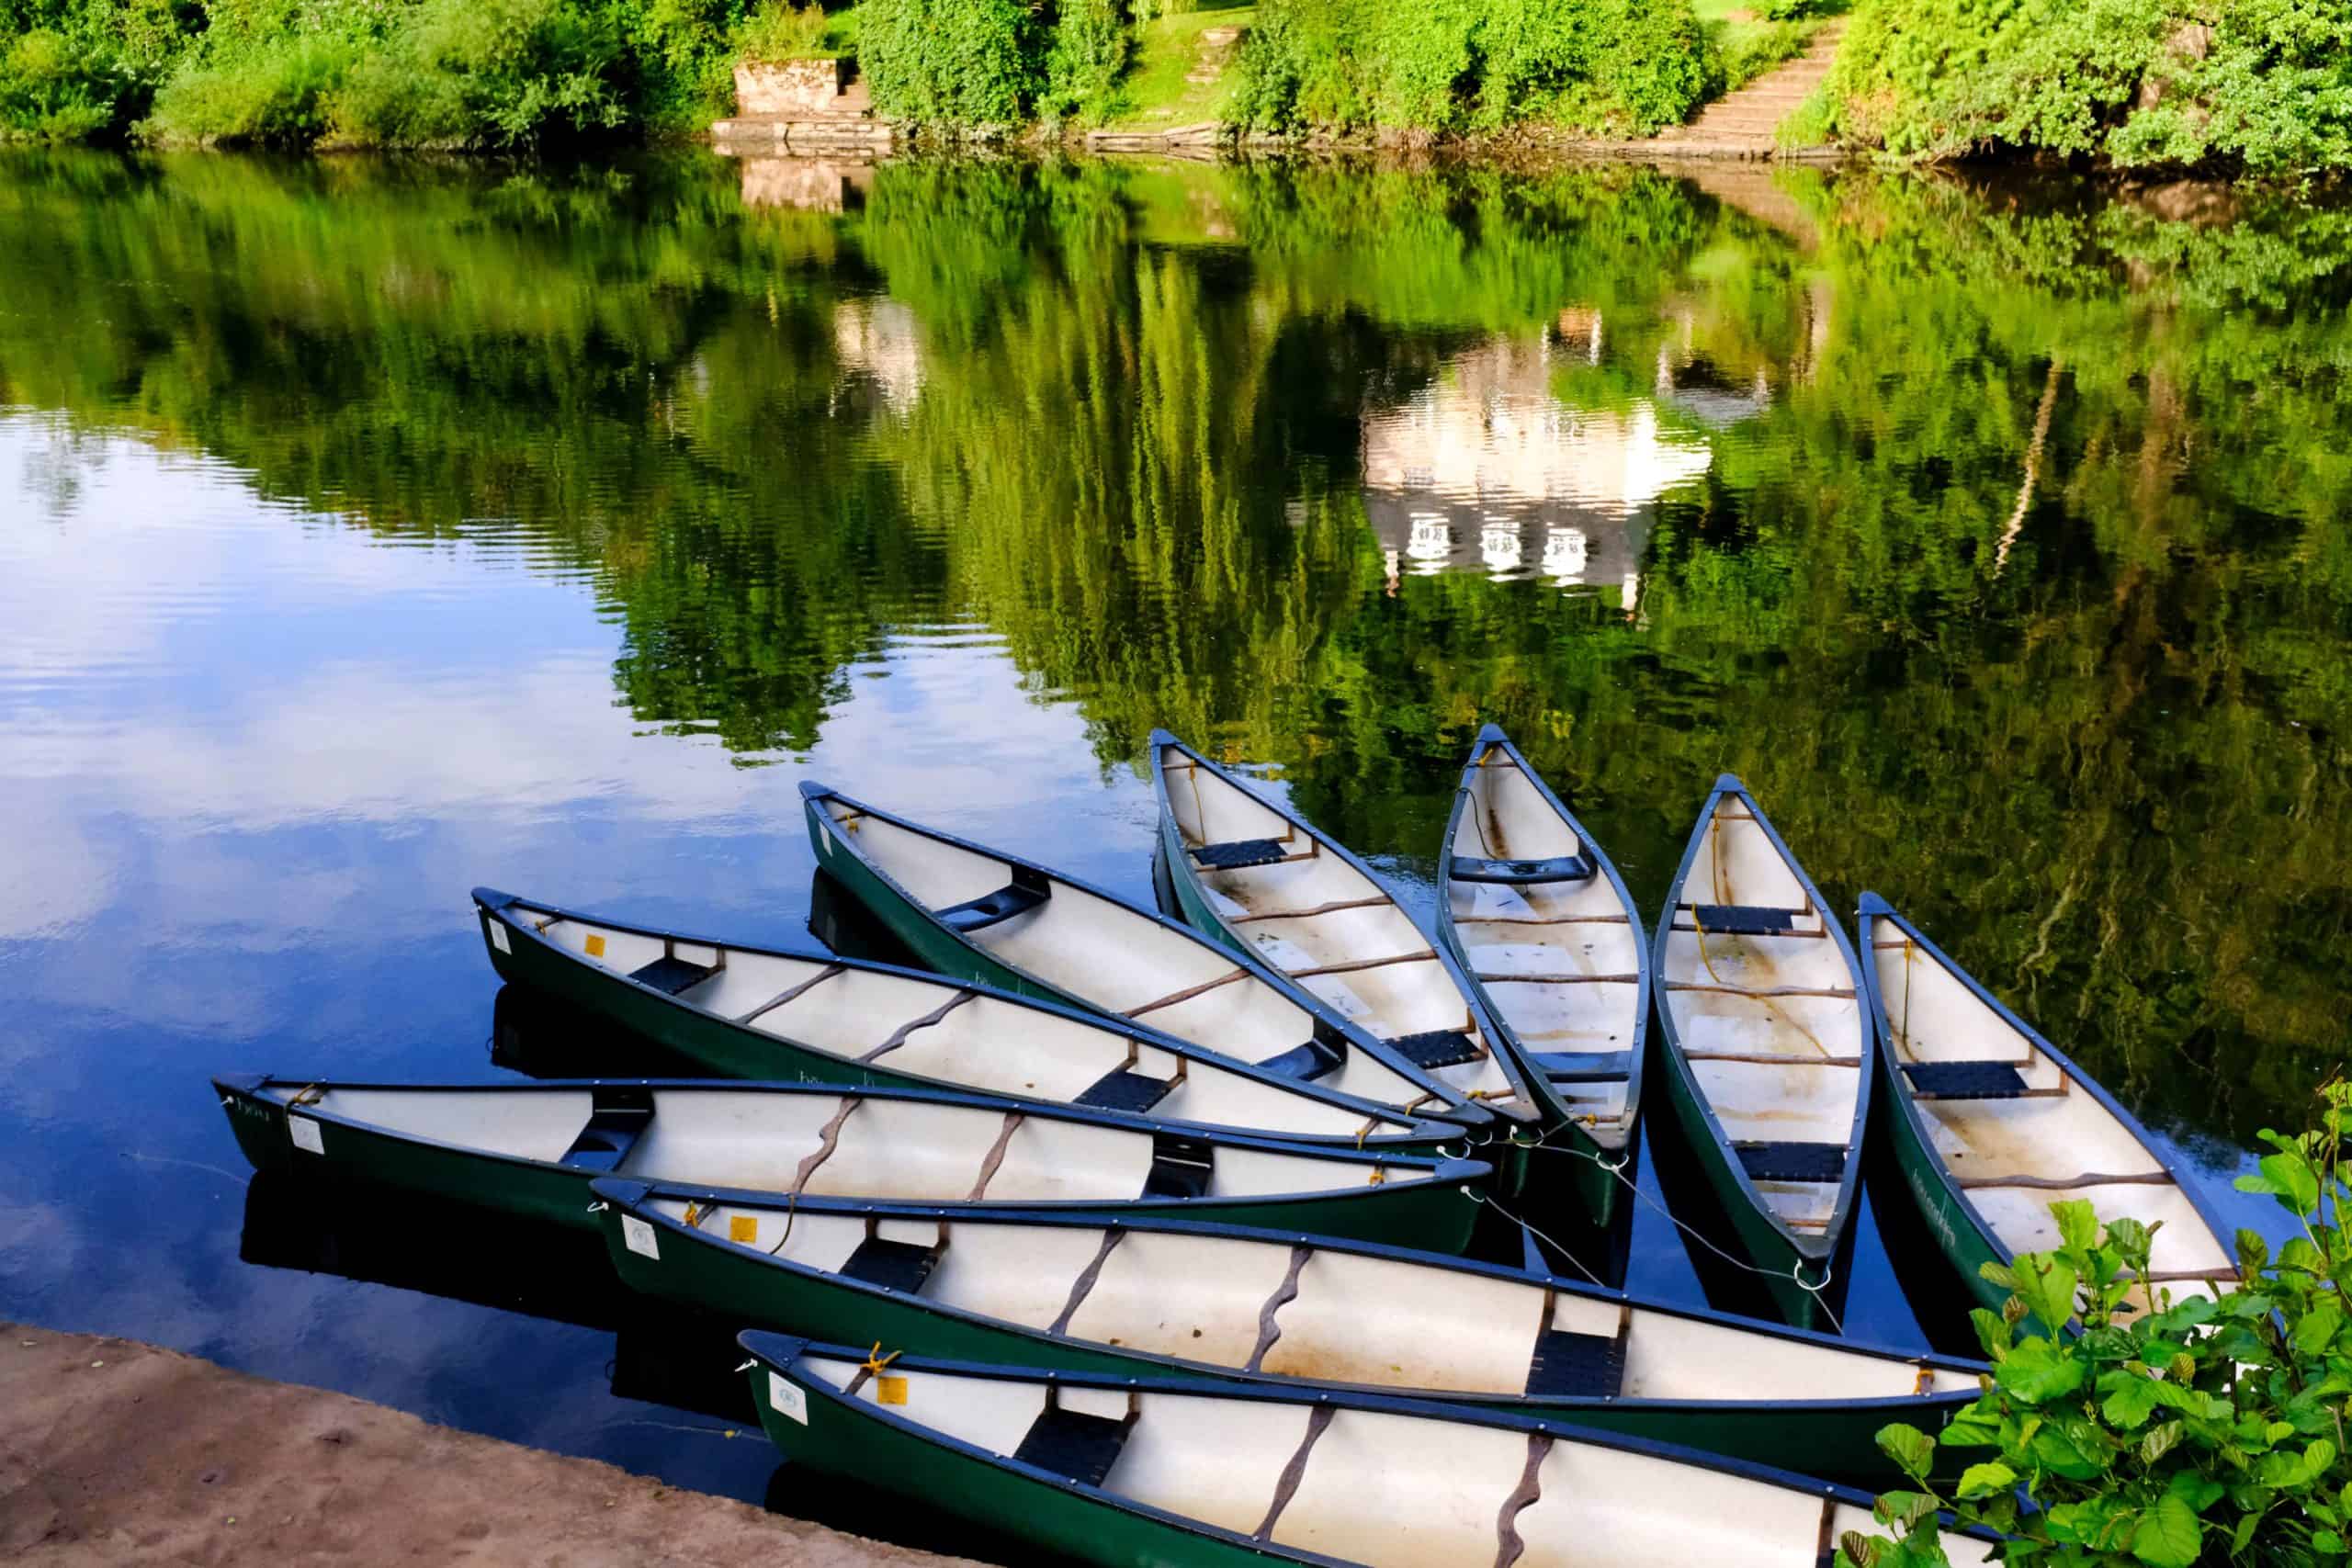 The river-based activities every visitor to Ross-on-Wye should try ...